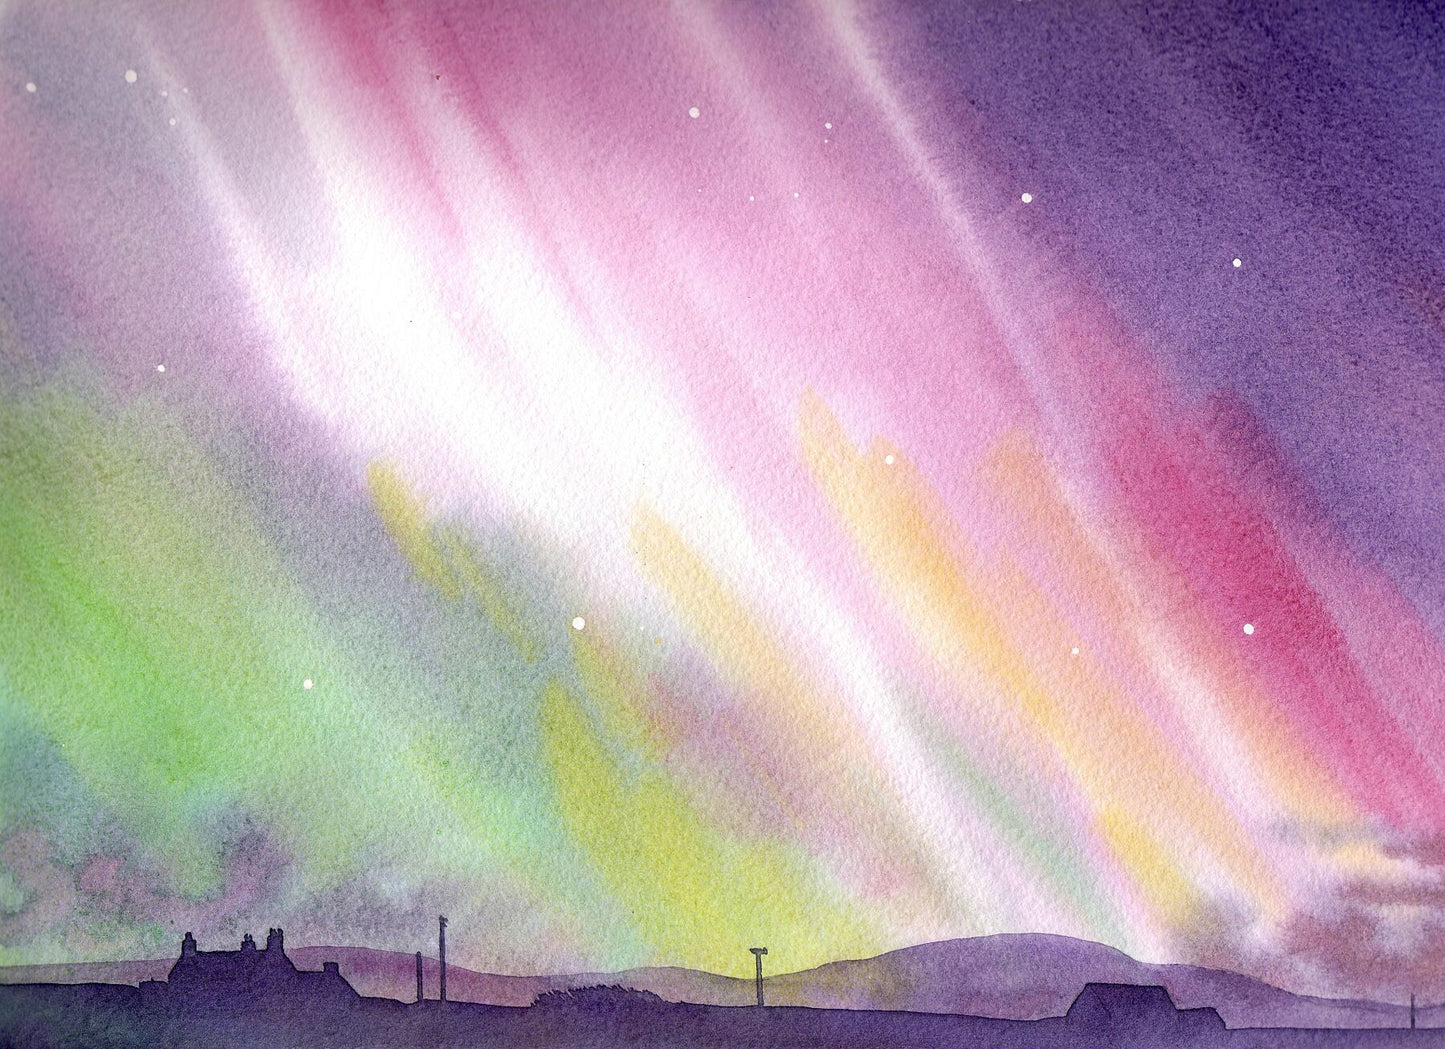 A print from a watercolour painting of the northern lights by Orkney artist Jane Glue, Scotland